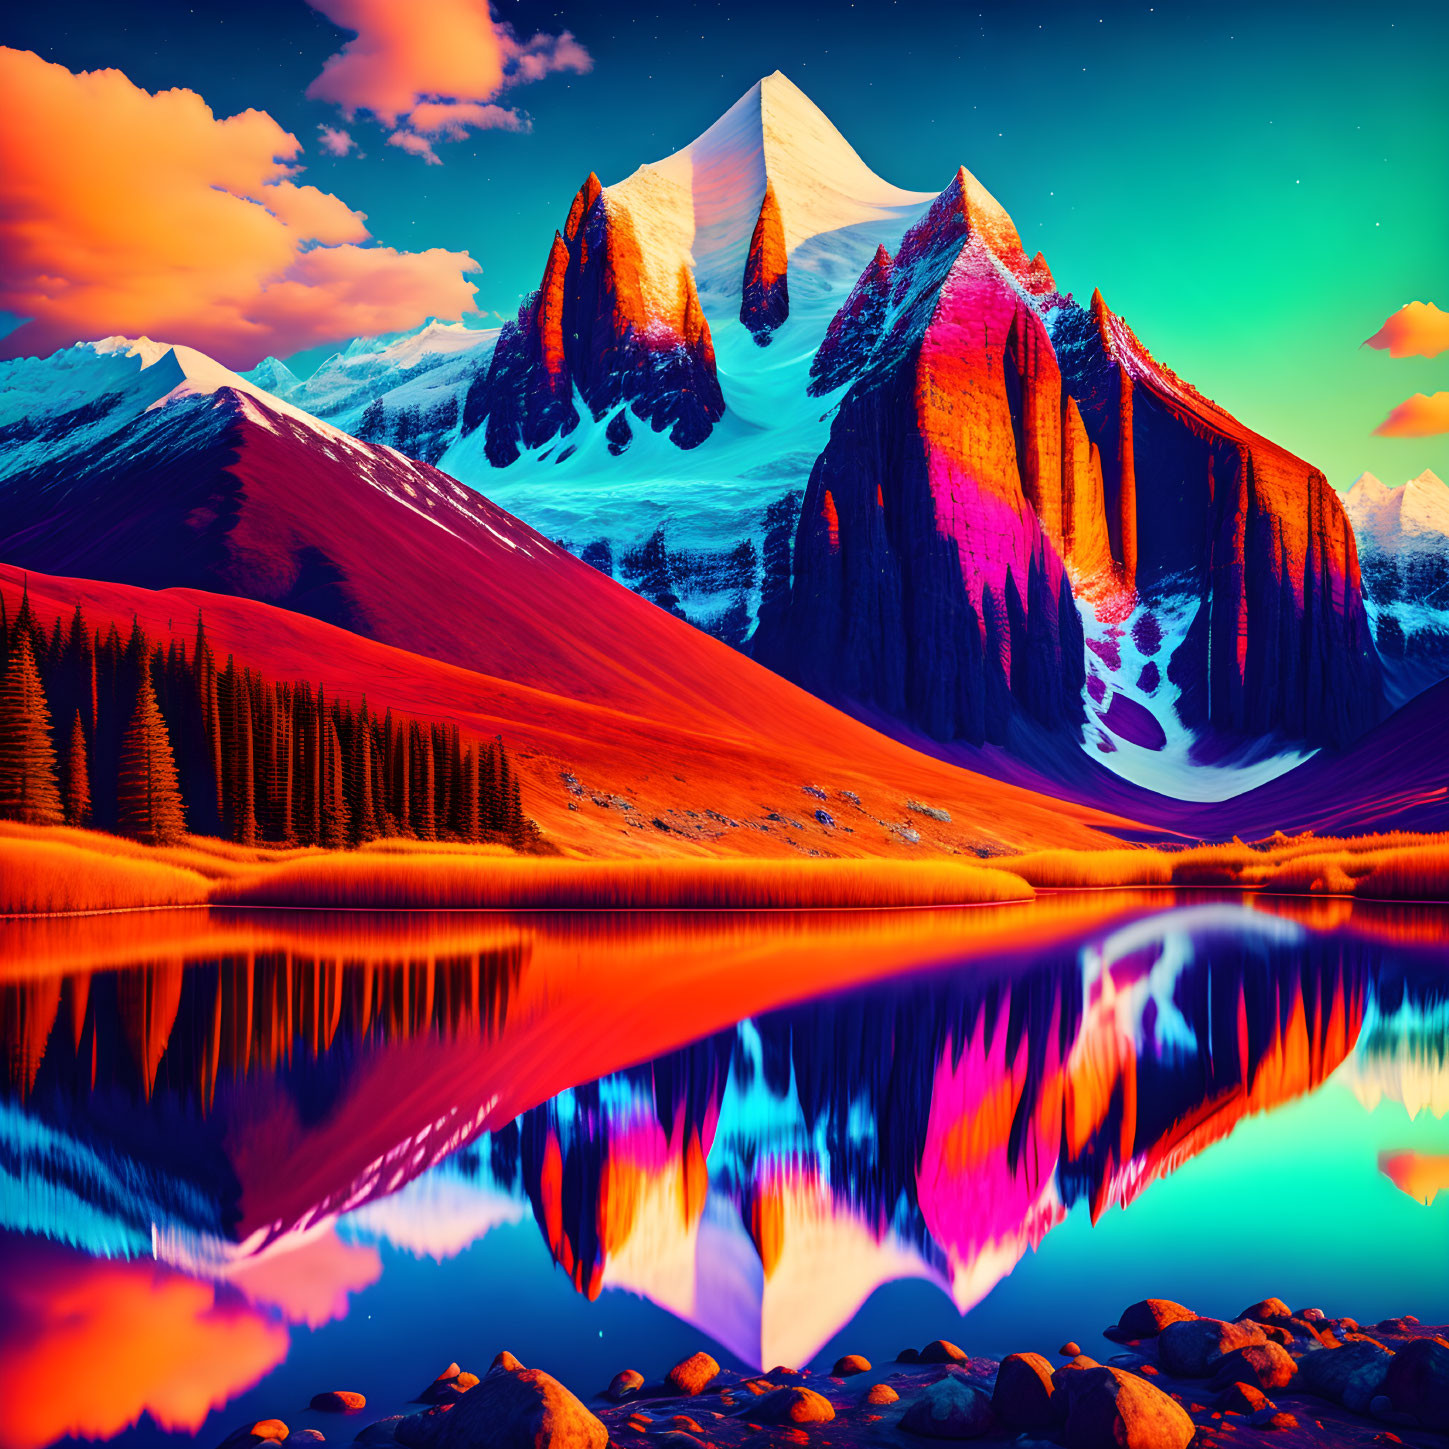 Surreal landscape with snow-capped mountains, starry sky, mirrored lake, and forest